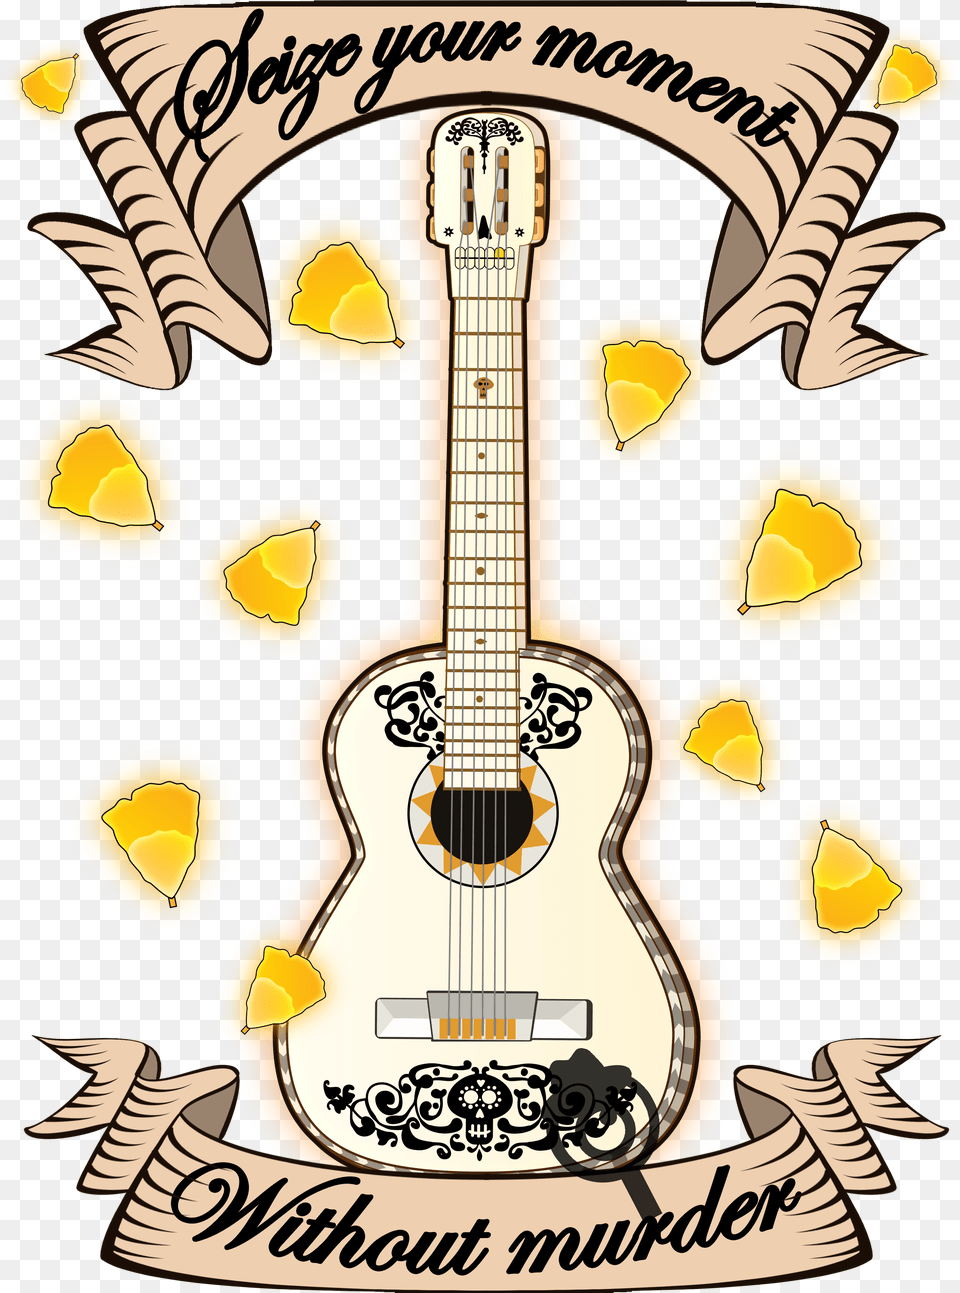 Coco Seize Your Moment Vector, Guitar, Musical Instrument, Bass Guitar Png